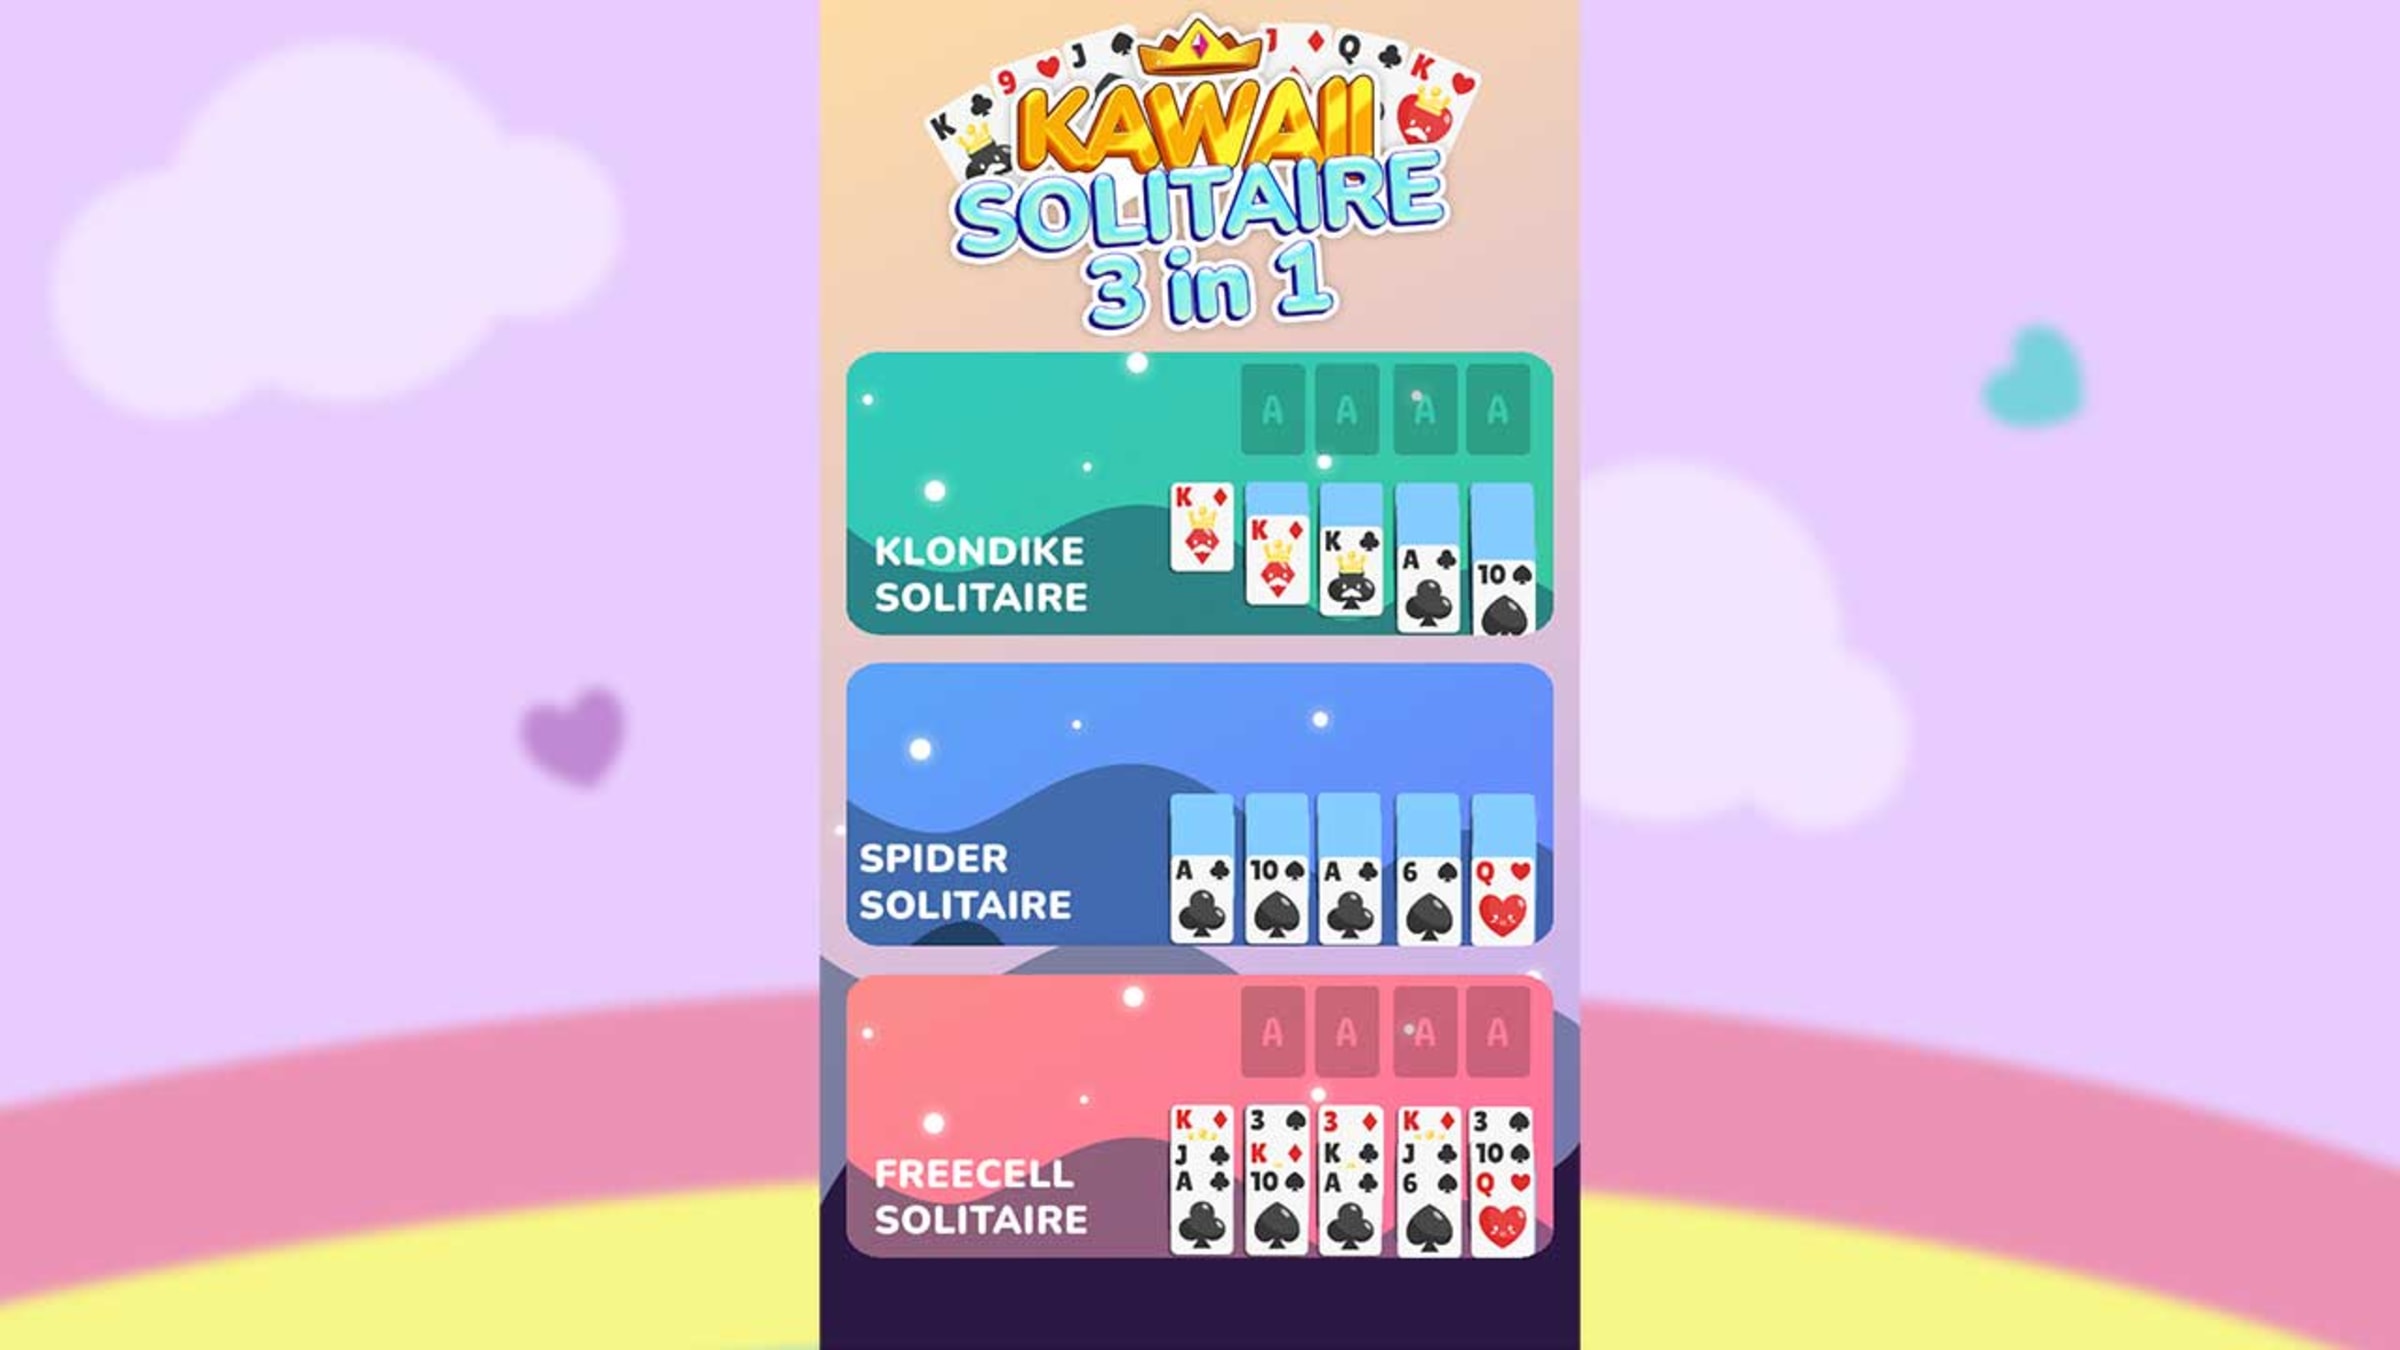 https://assets.nintendo.com/image/upload/c_fill,w_1200/q_auto:best/f_auto/dpr_2.0/ncom/en_US/games/switch/k/kawaii-solitaire-3-in-1-switch/